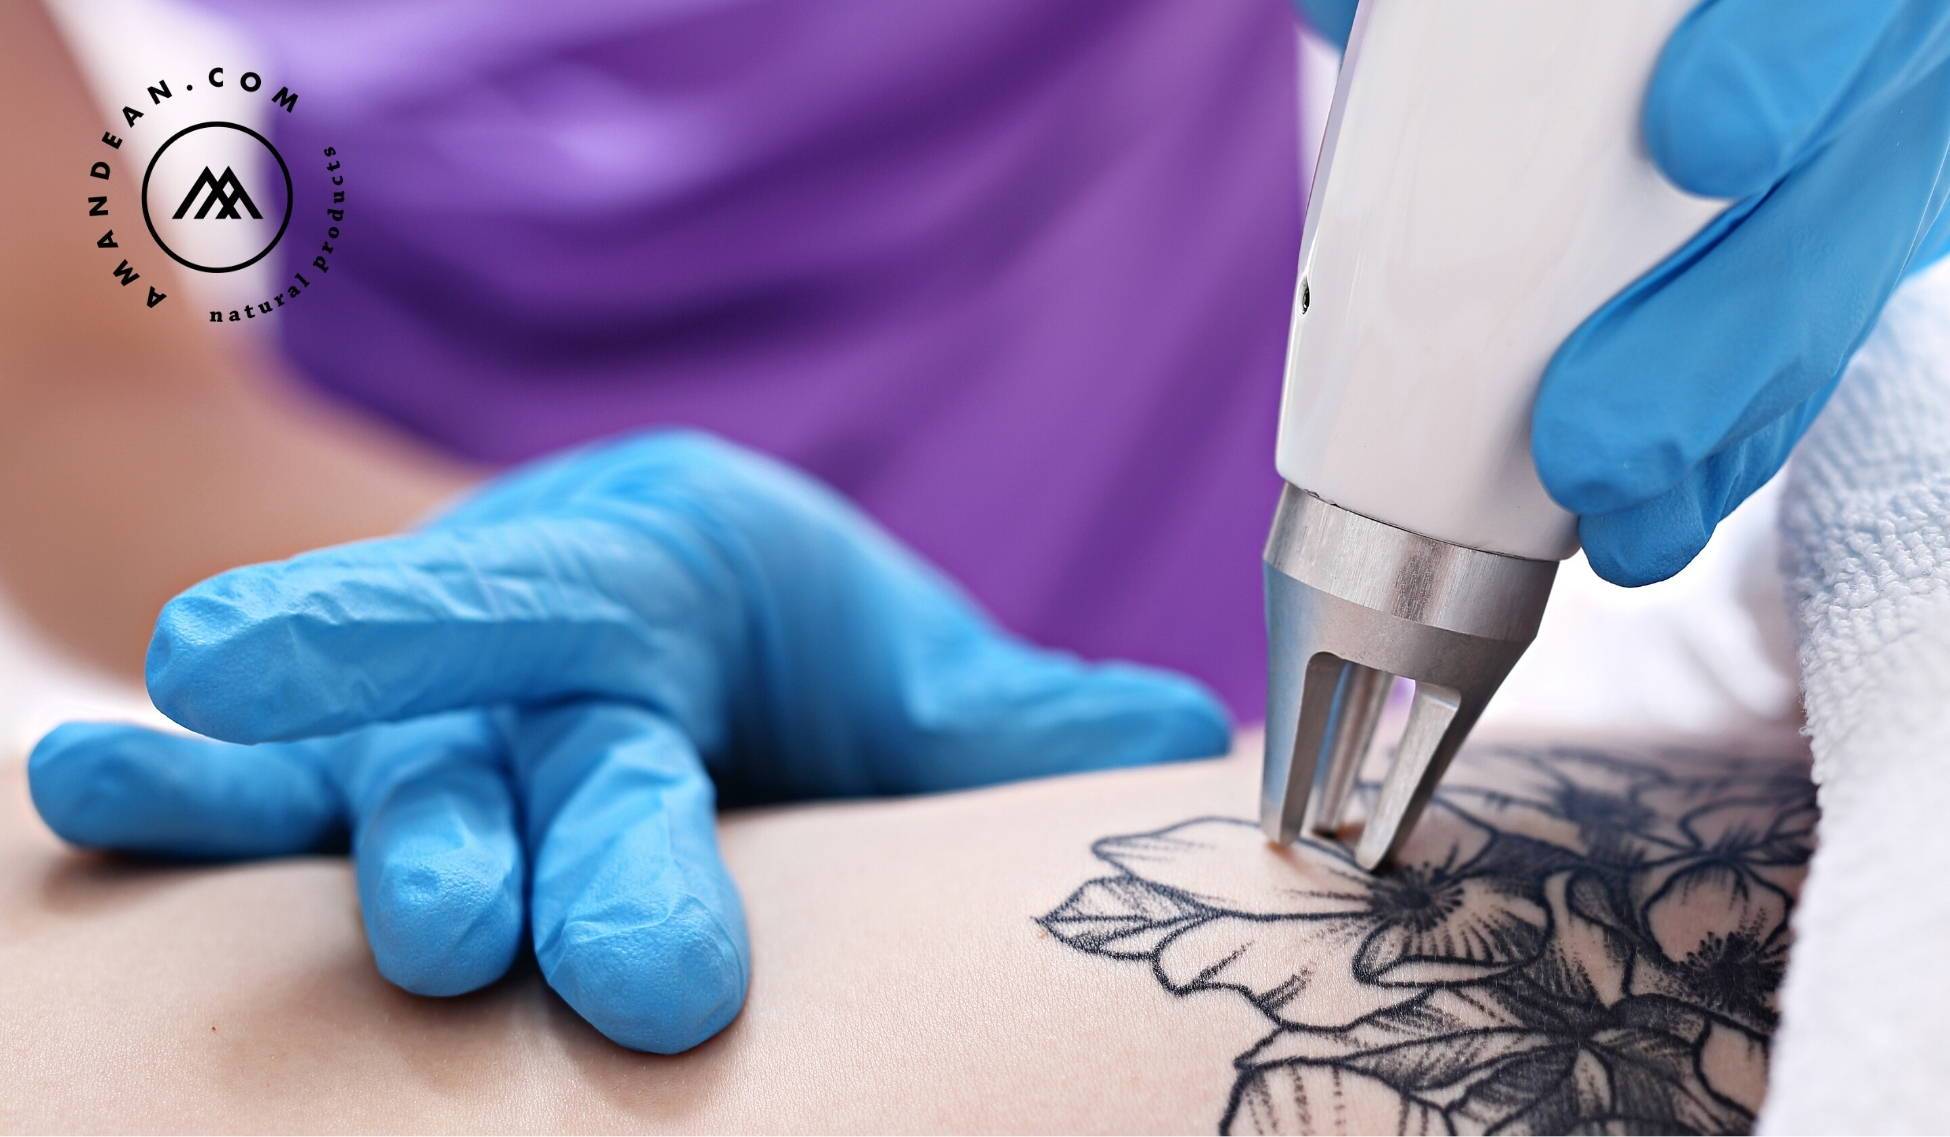 Laser Tattoo Removal Aftercare Instructions  LoveToKnow Health  Wellness